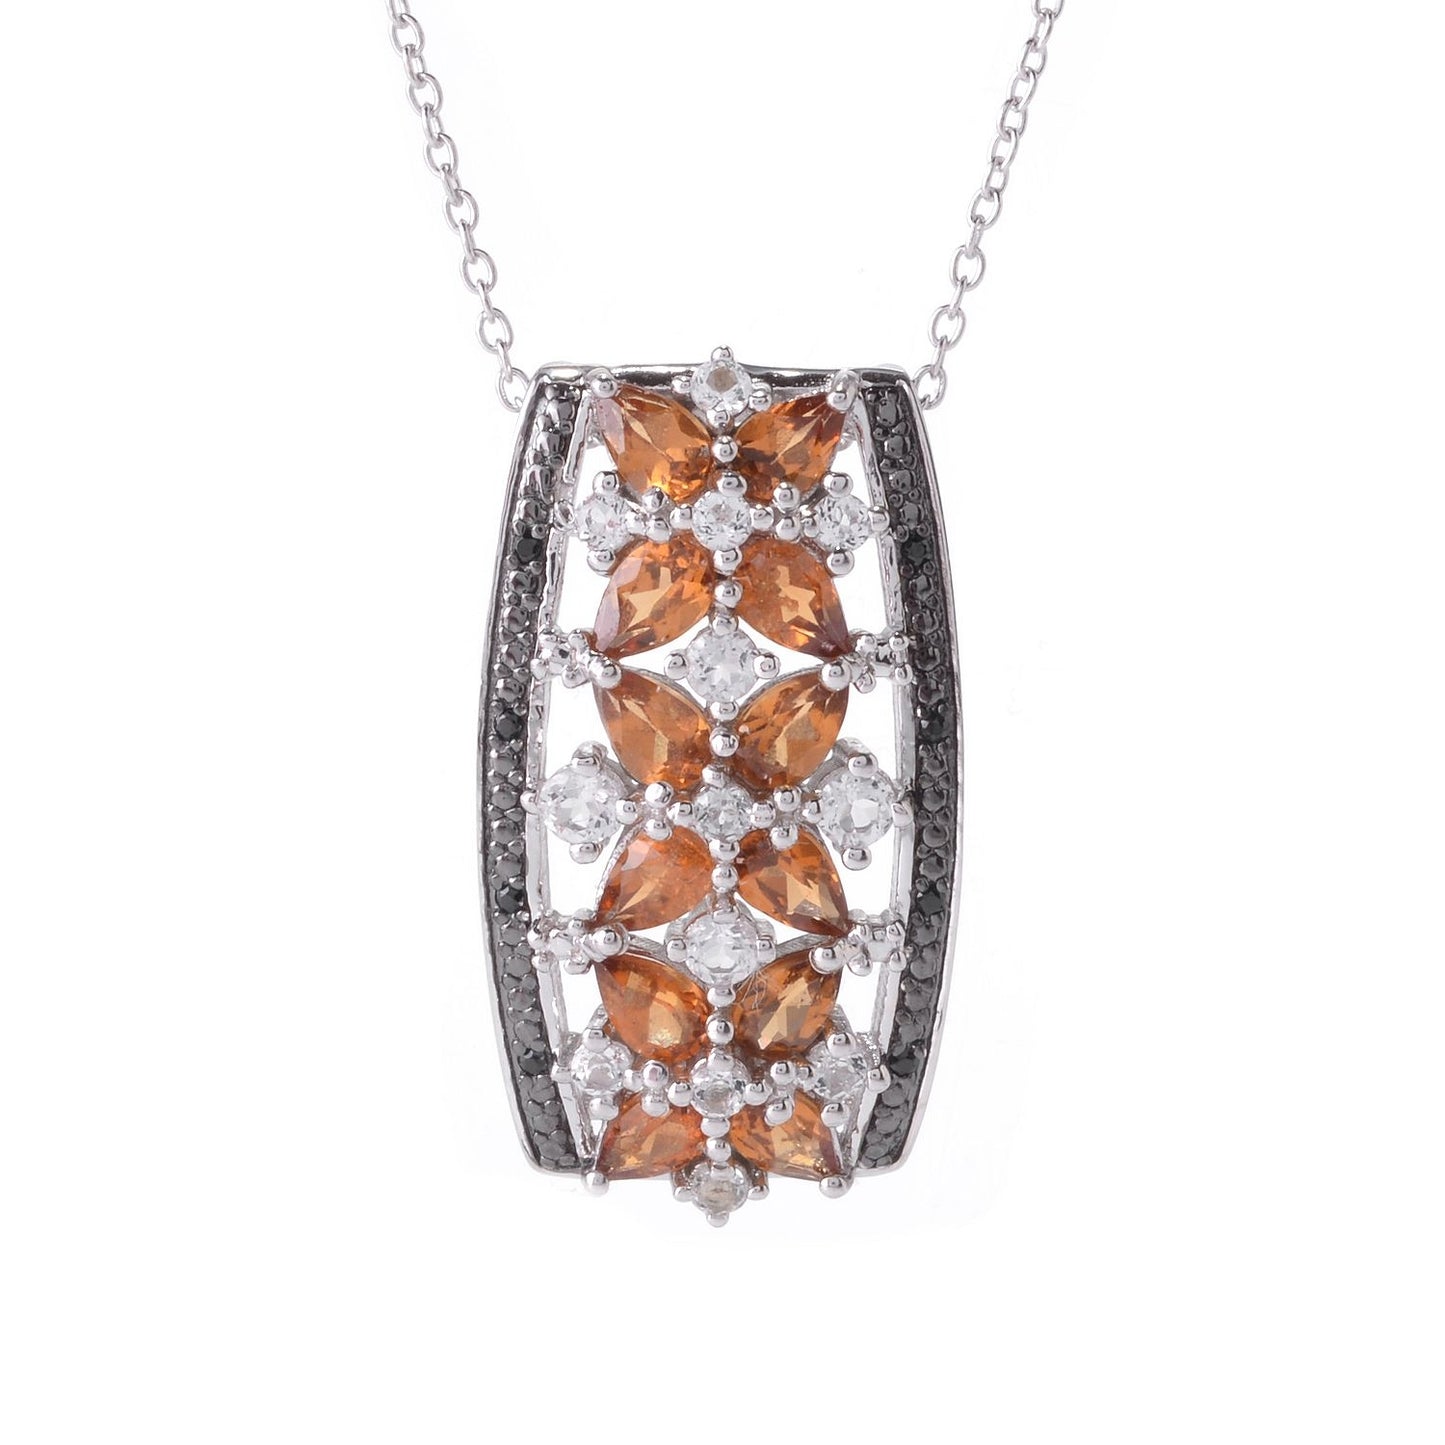 Pinctore Sterling Silver 3.83ctw Hessonite Garnet Cluster Pendant 1.25'L with 18' Chain - pinctore